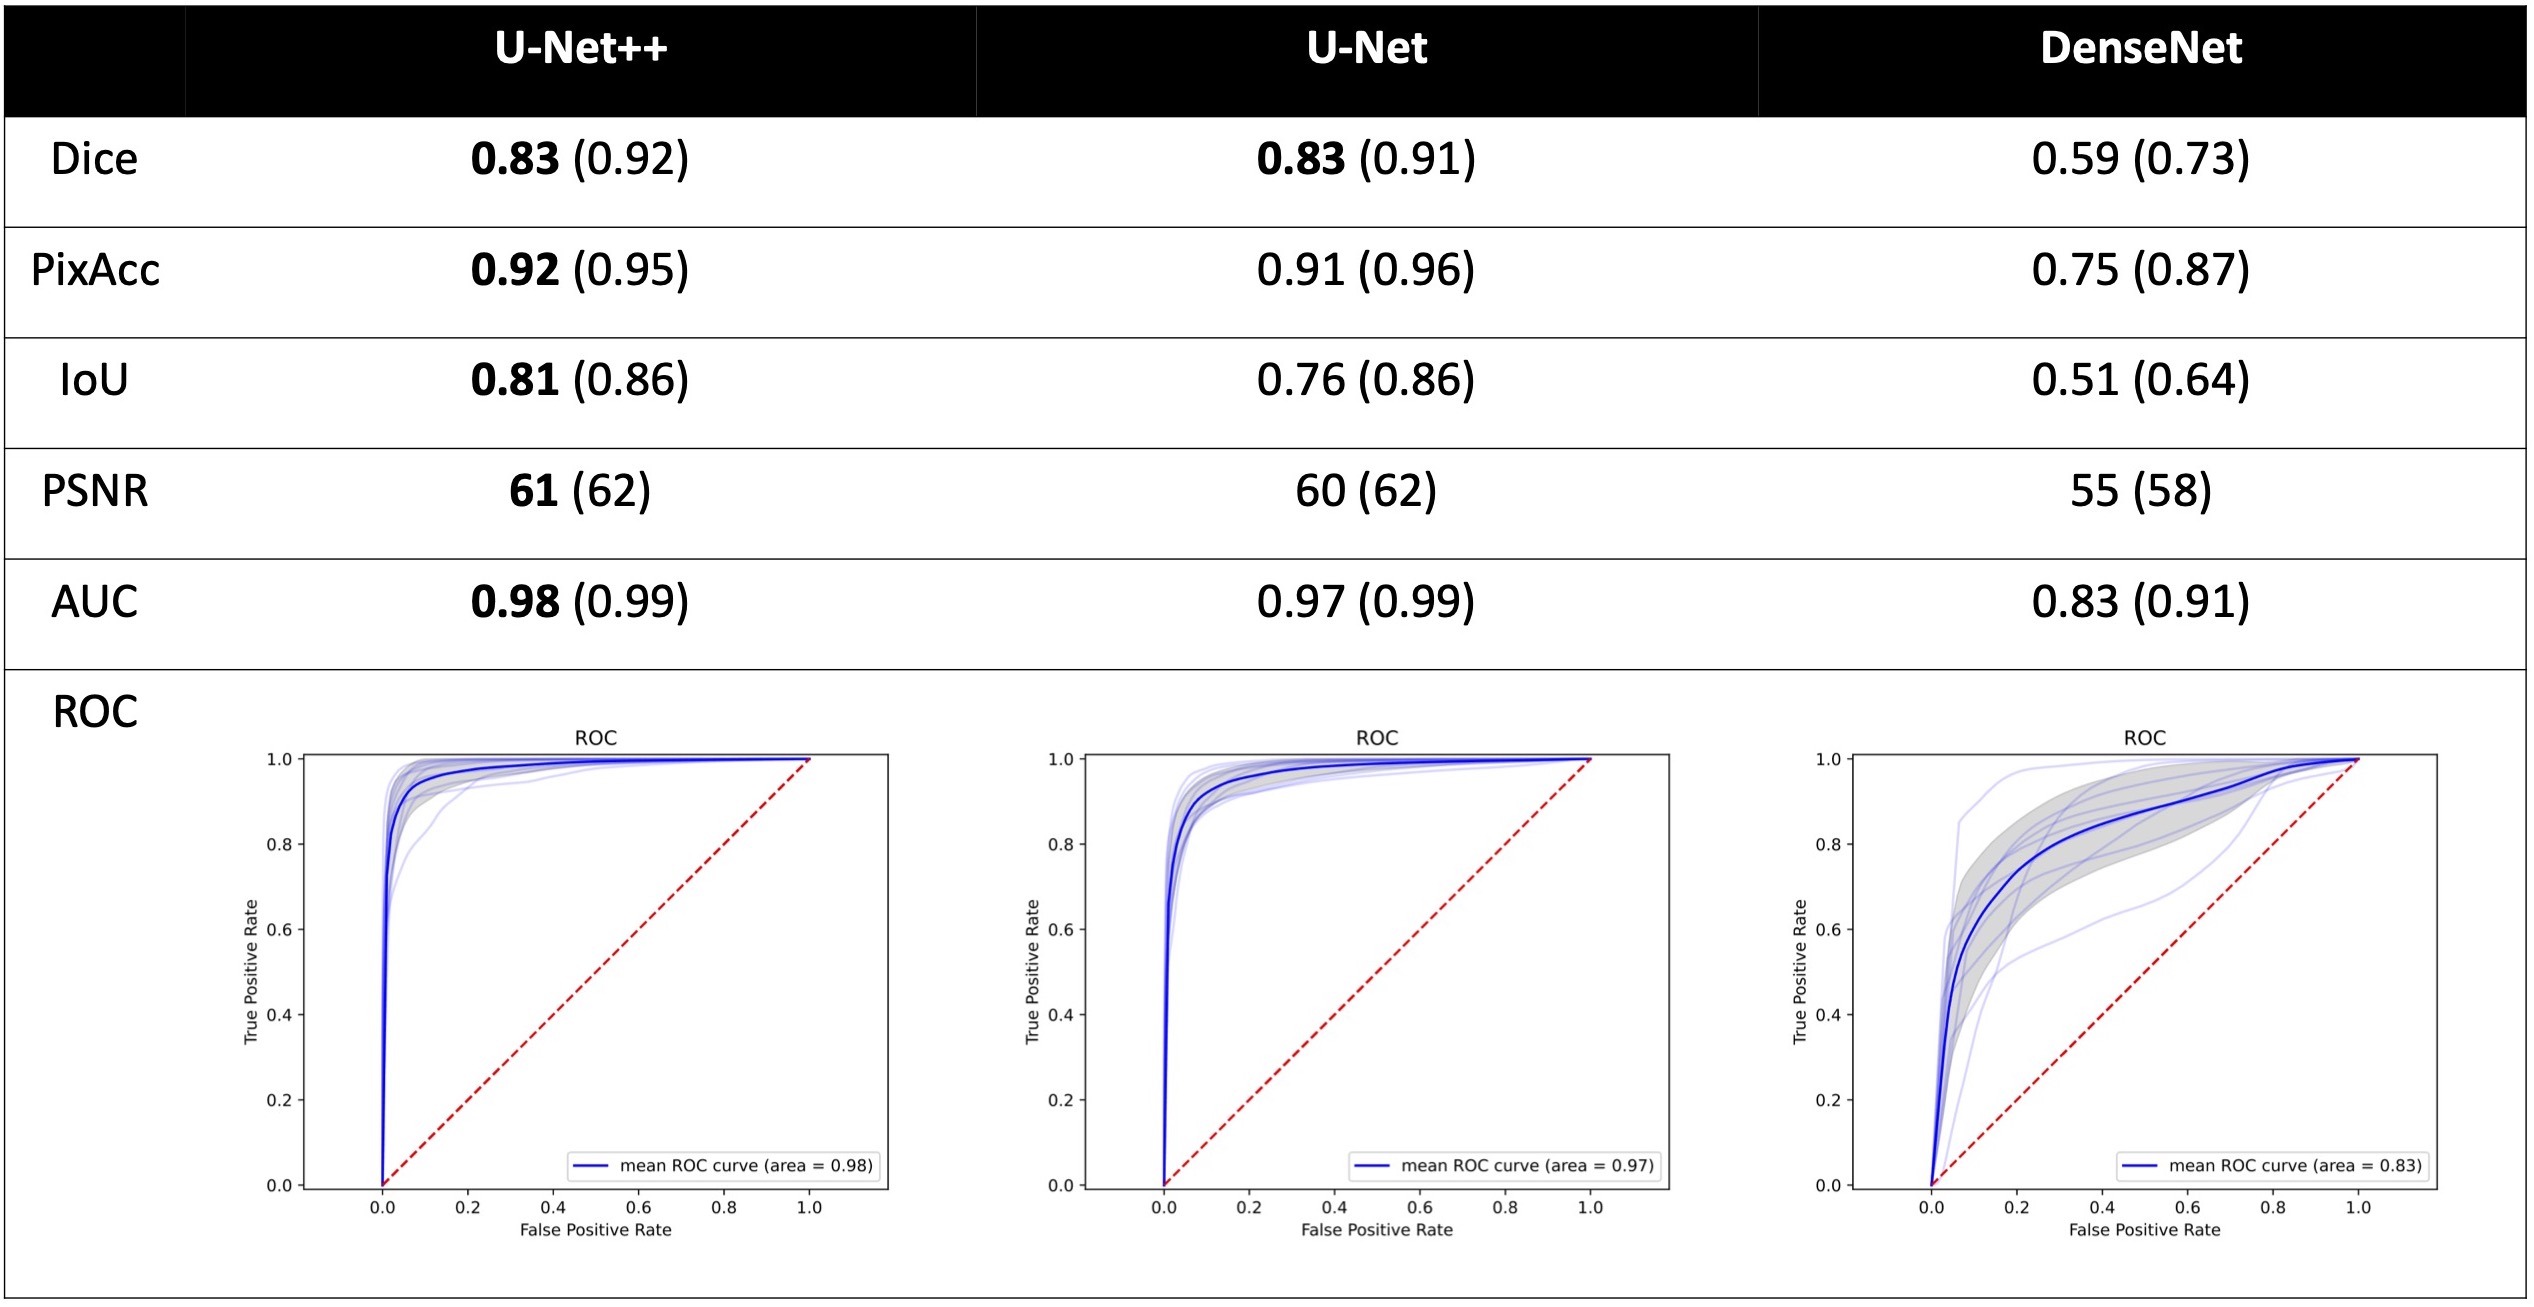 summary of results between U-Net, U-Net++, and DenseNet for different scoring metrics for testing and validation